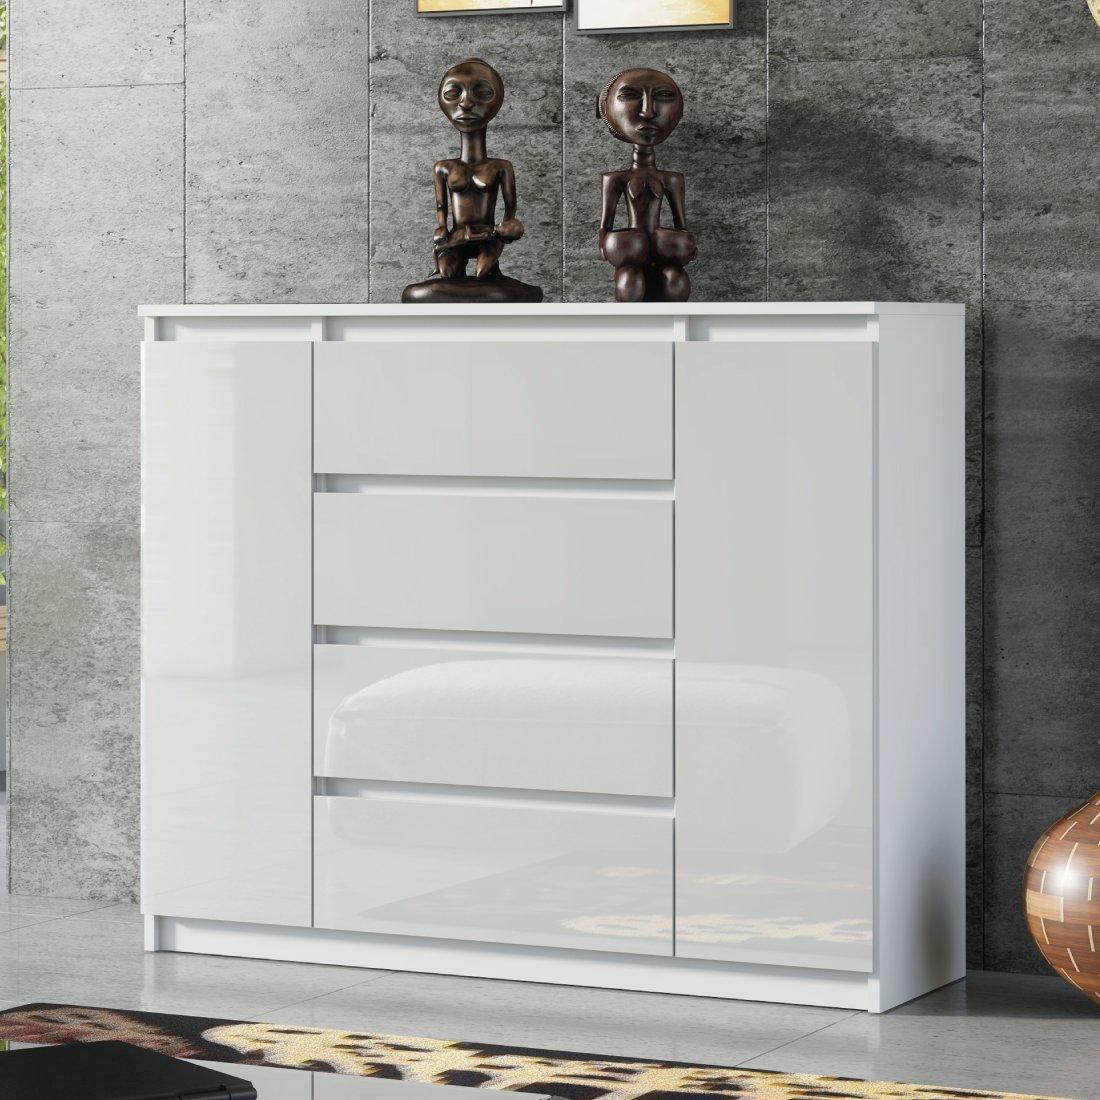 Chest Of Drawers Bedroom - White Gloss 4 Drawers 2 Doors